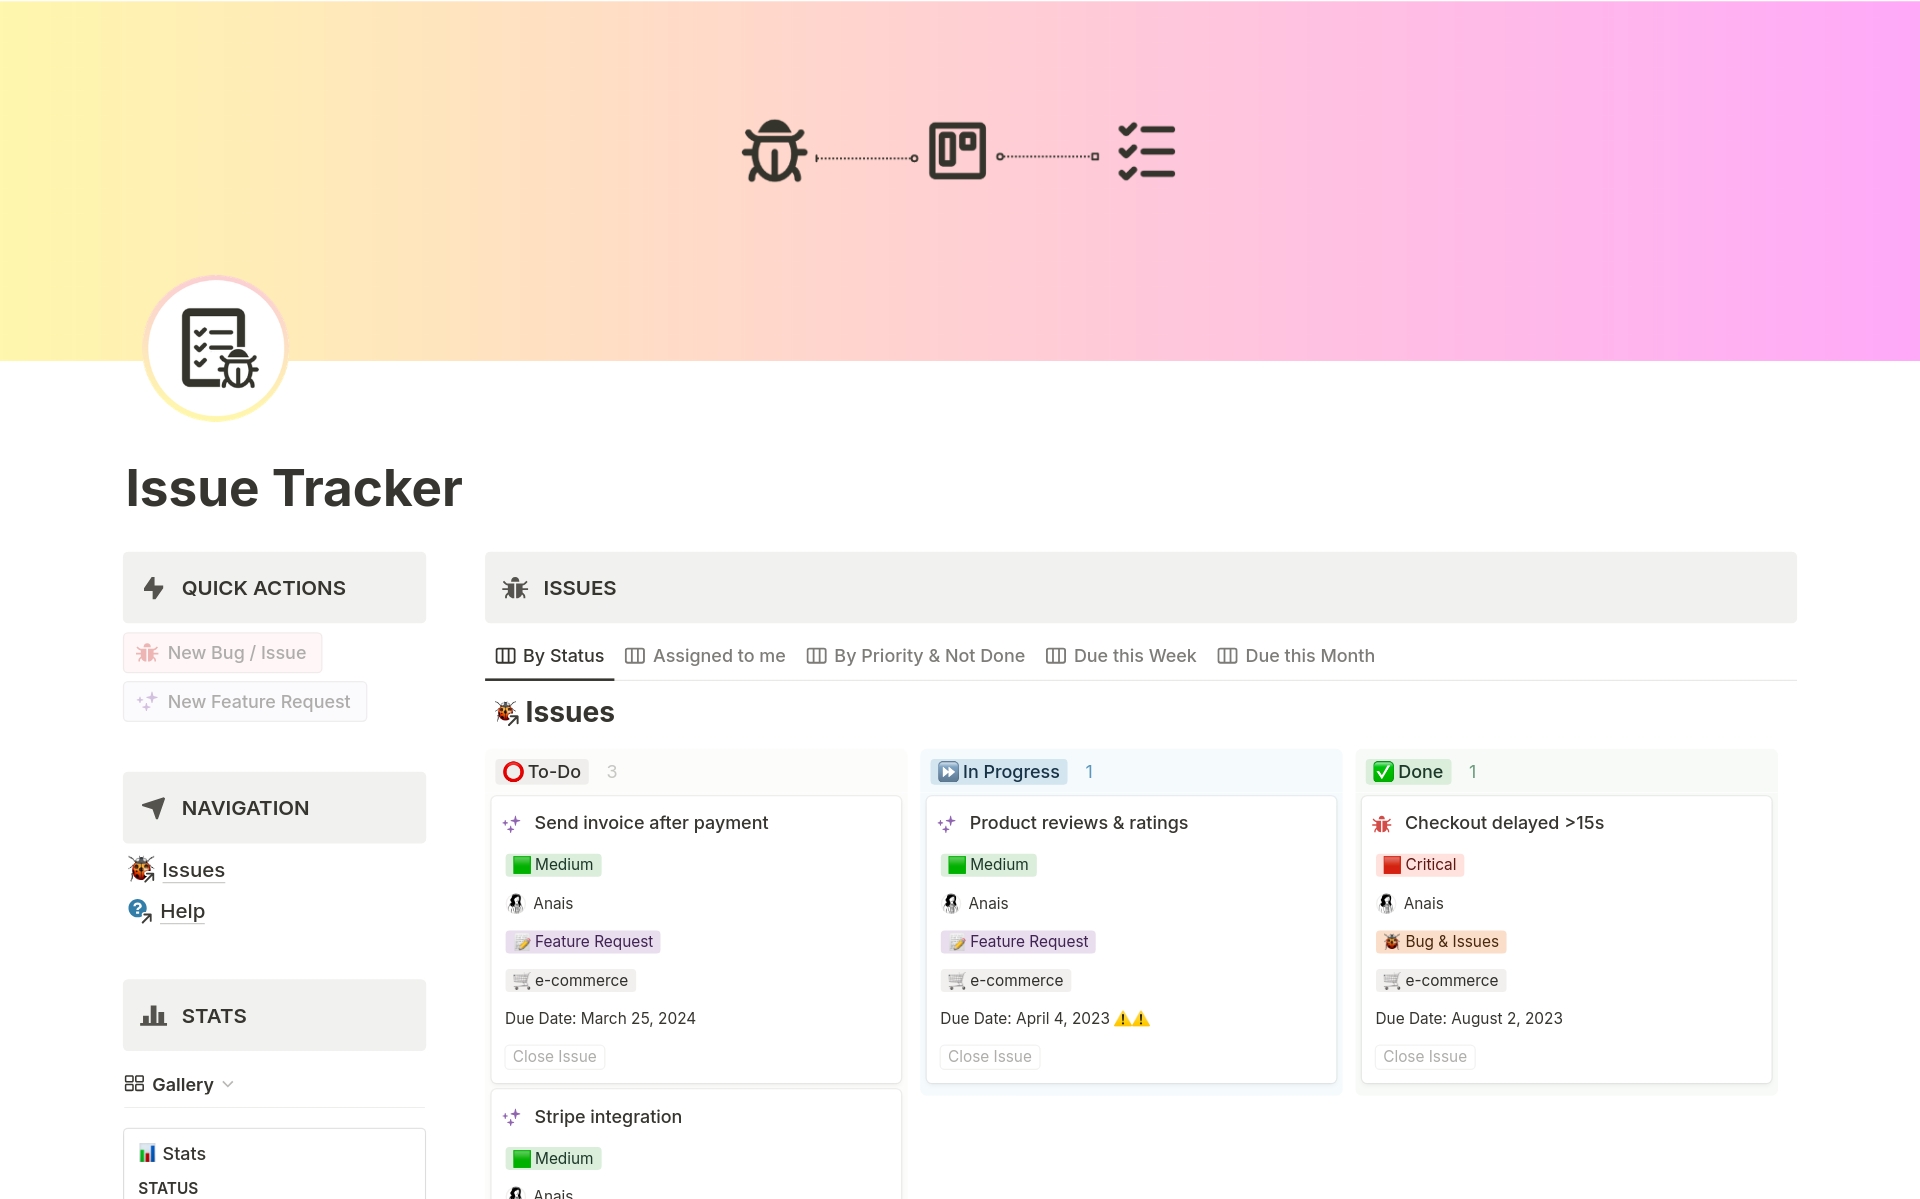 Easily manage bugs, issues, and feature requests for your products and projects in one place.